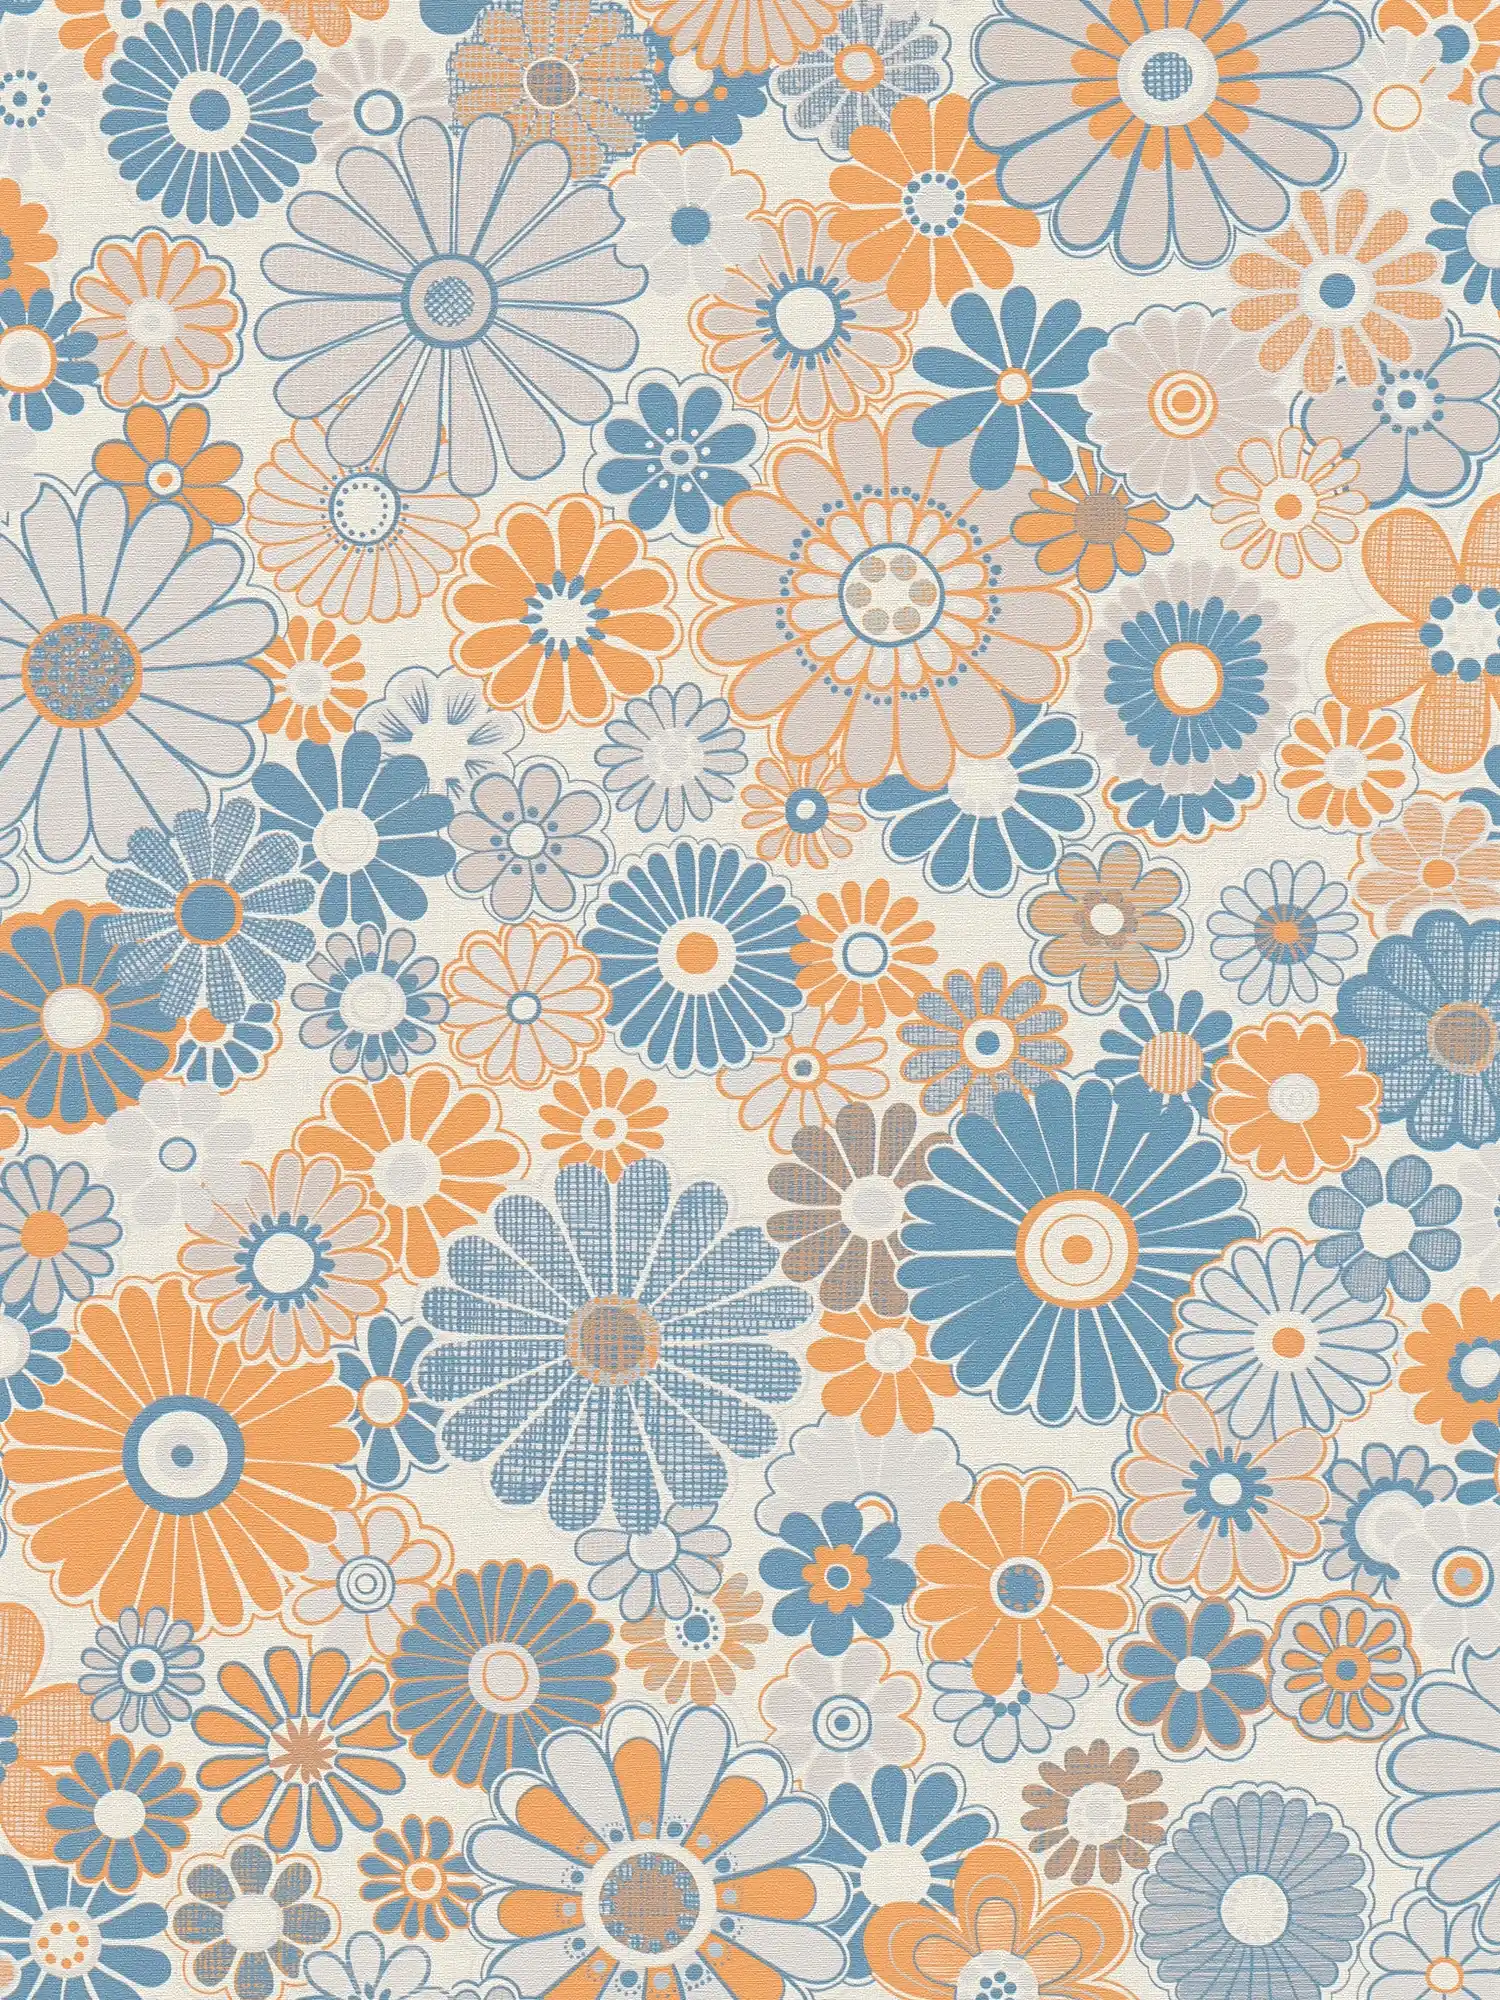 Non-woven wallpaper with floral pattern in retro style - blue, orange, grey
